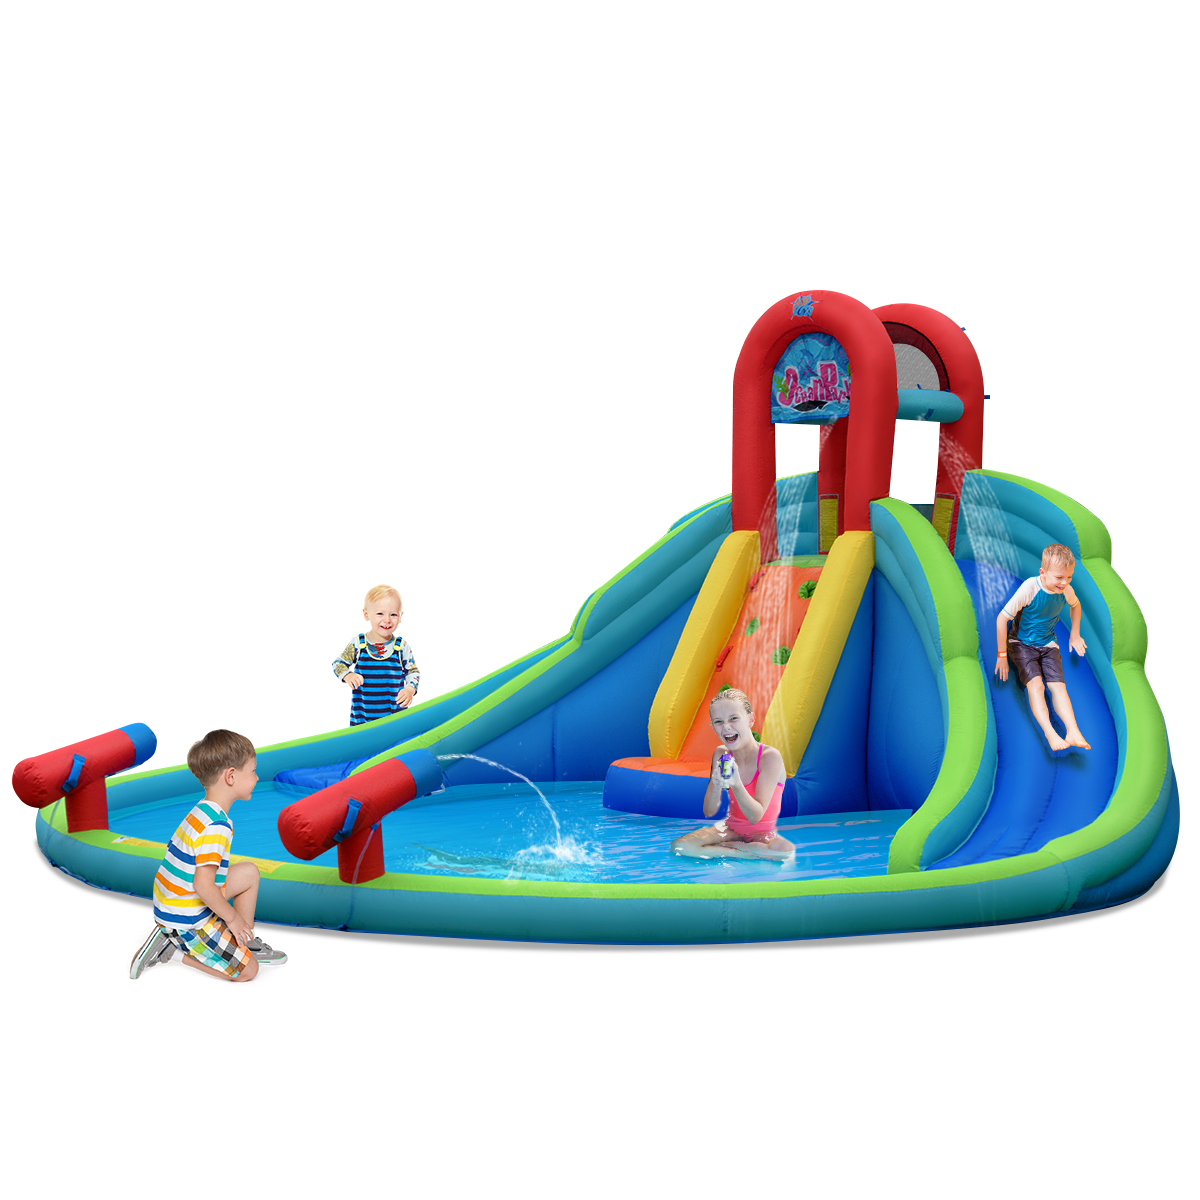 Costway Inflatable Bounce House with Splash Pool, Dual Slides, Climbing Wall